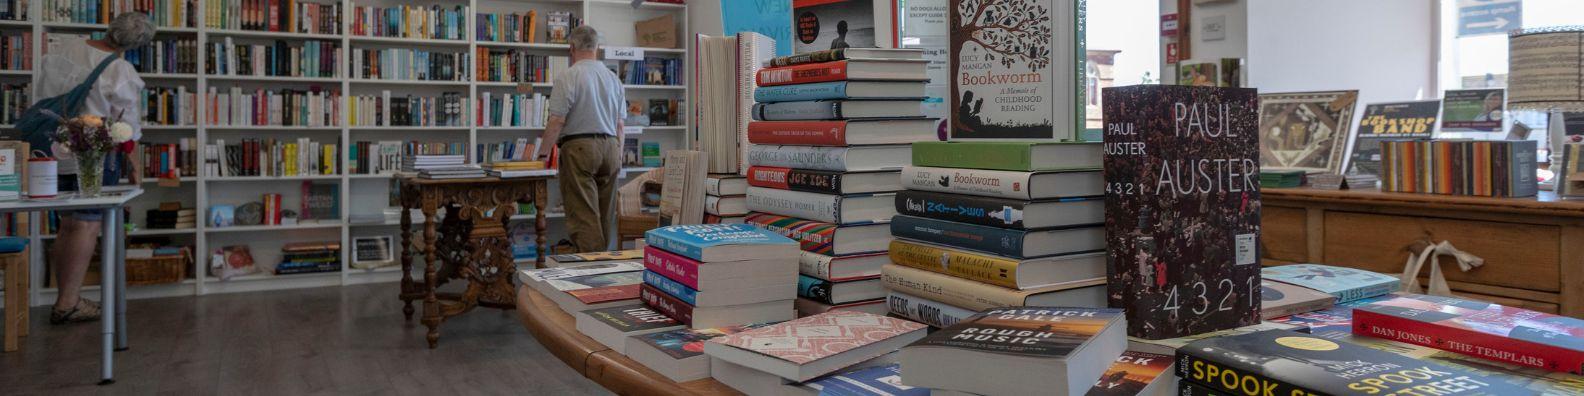 Inside the Wigtown Festival Company Bookshop. Shelves and tables of books with customers browsing.